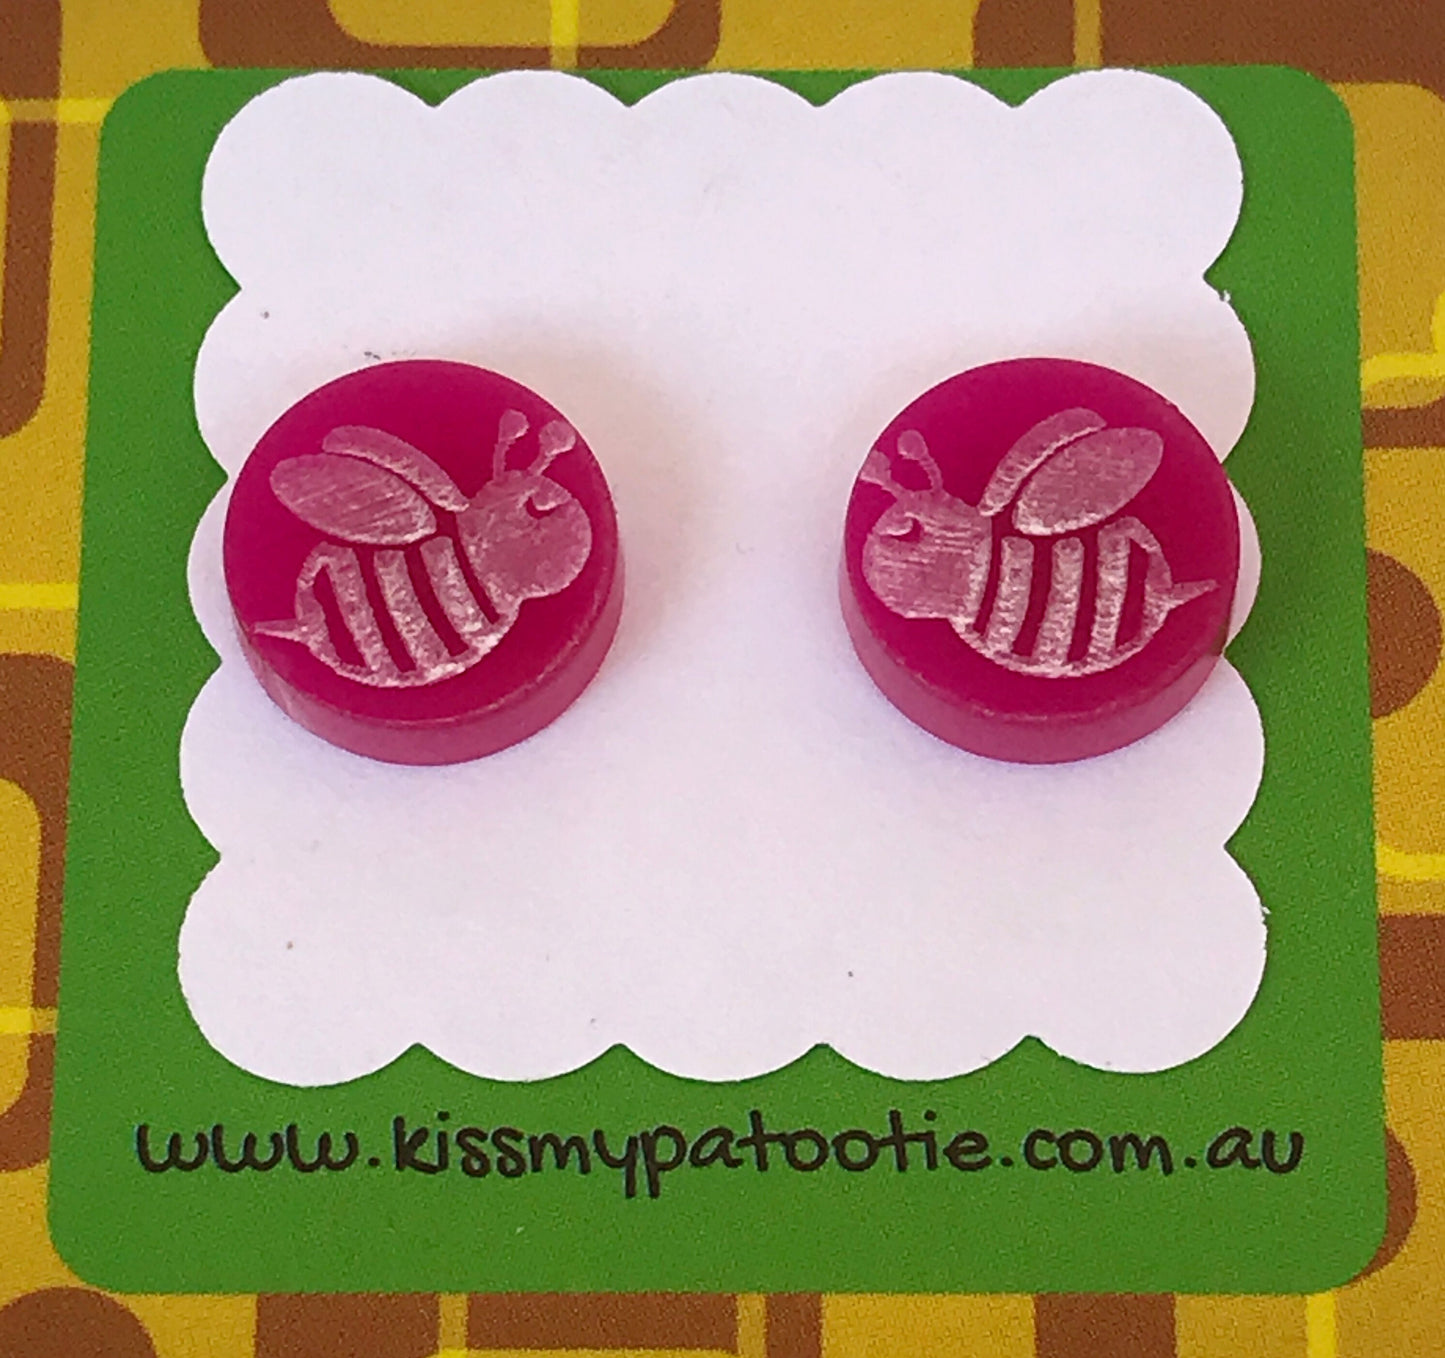 Bees - Laser Cut Earrings / Studs - acrylic - more colours available